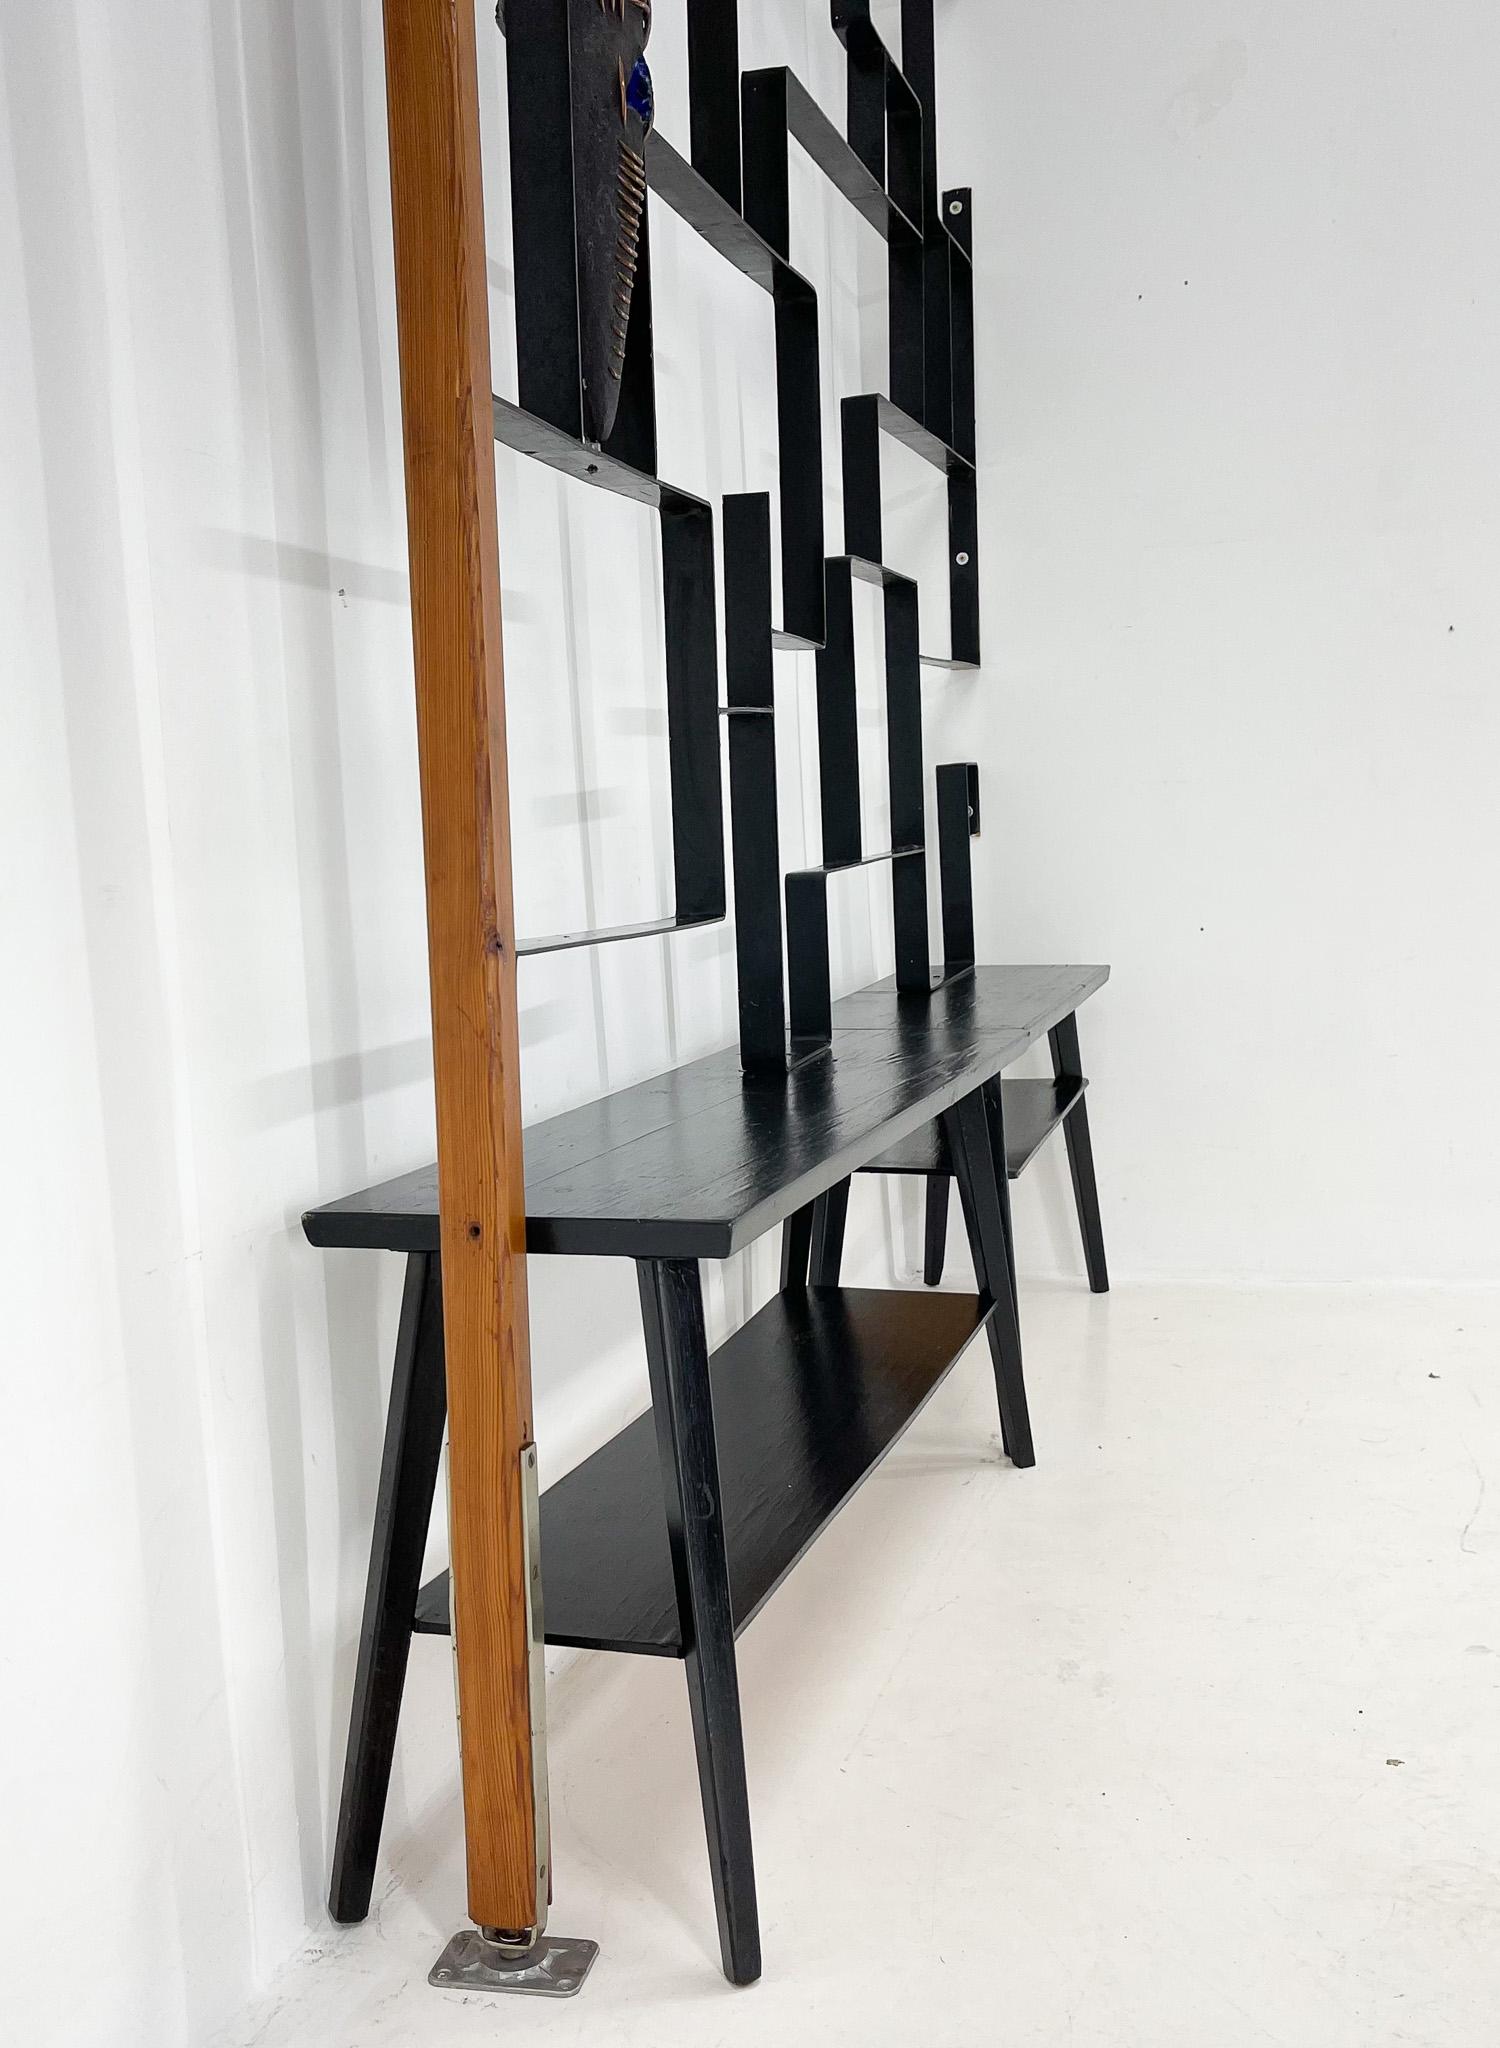 1960's Art Wall Unit or Room Divider with Sculpture by Jelínek For Sale 2